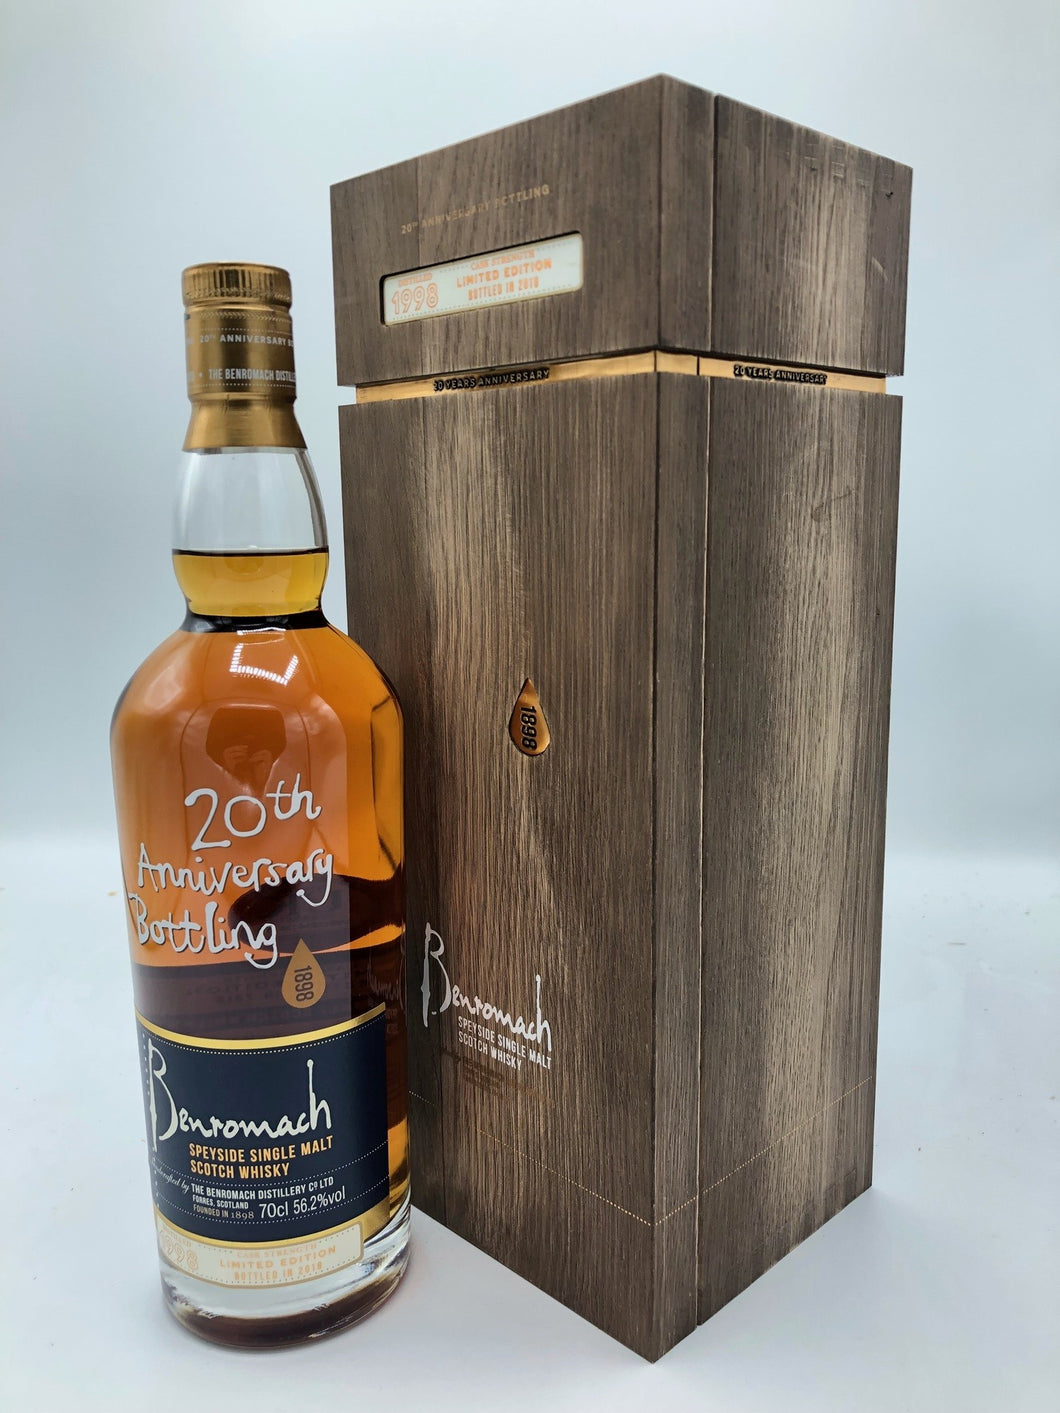 Benromach 1998 20th Anniversary Release